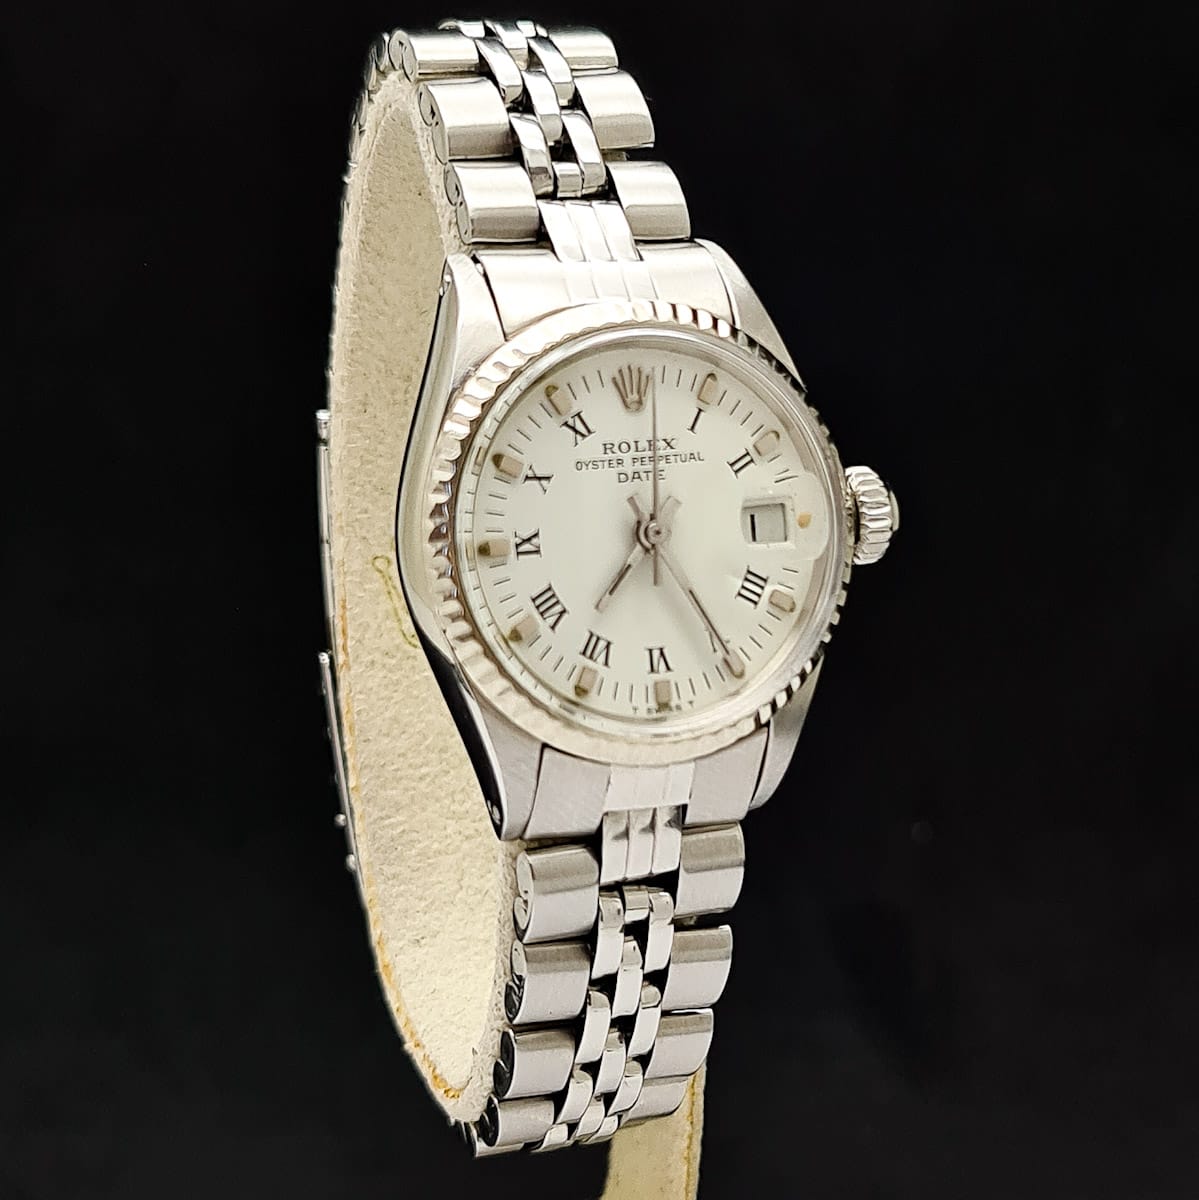 ROLEX OYSTER PERPETUAL DATE - VINTAGE